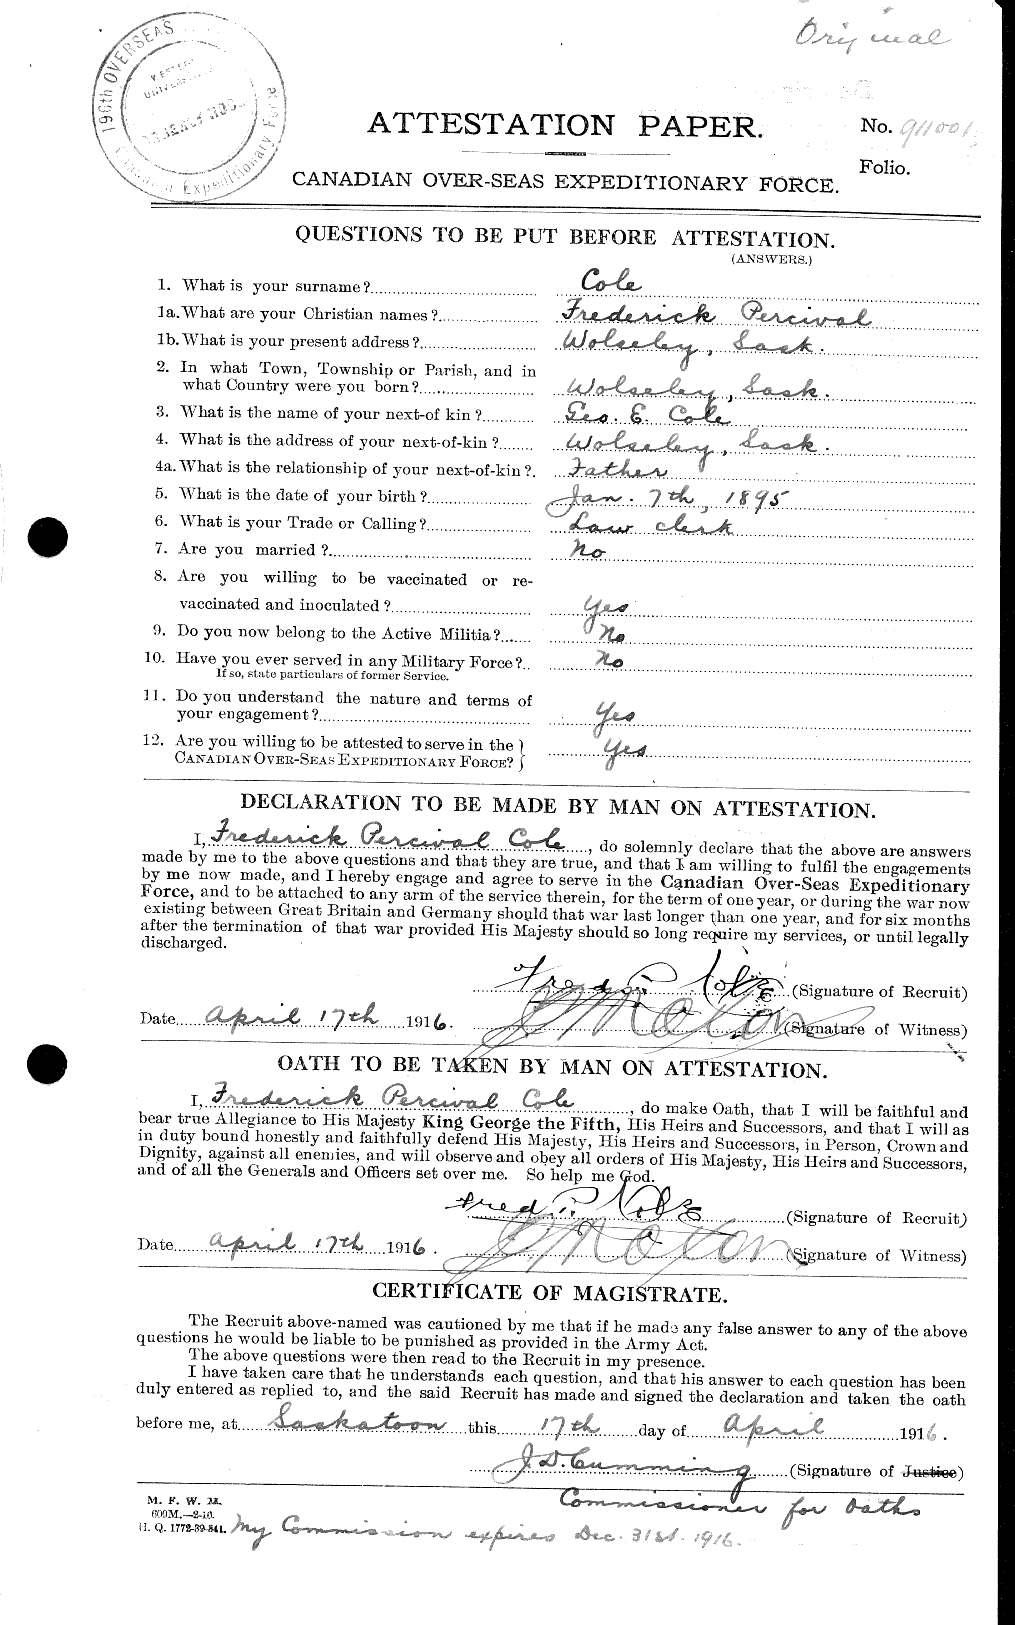 Personnel Records of the First World War - CEF 027742a